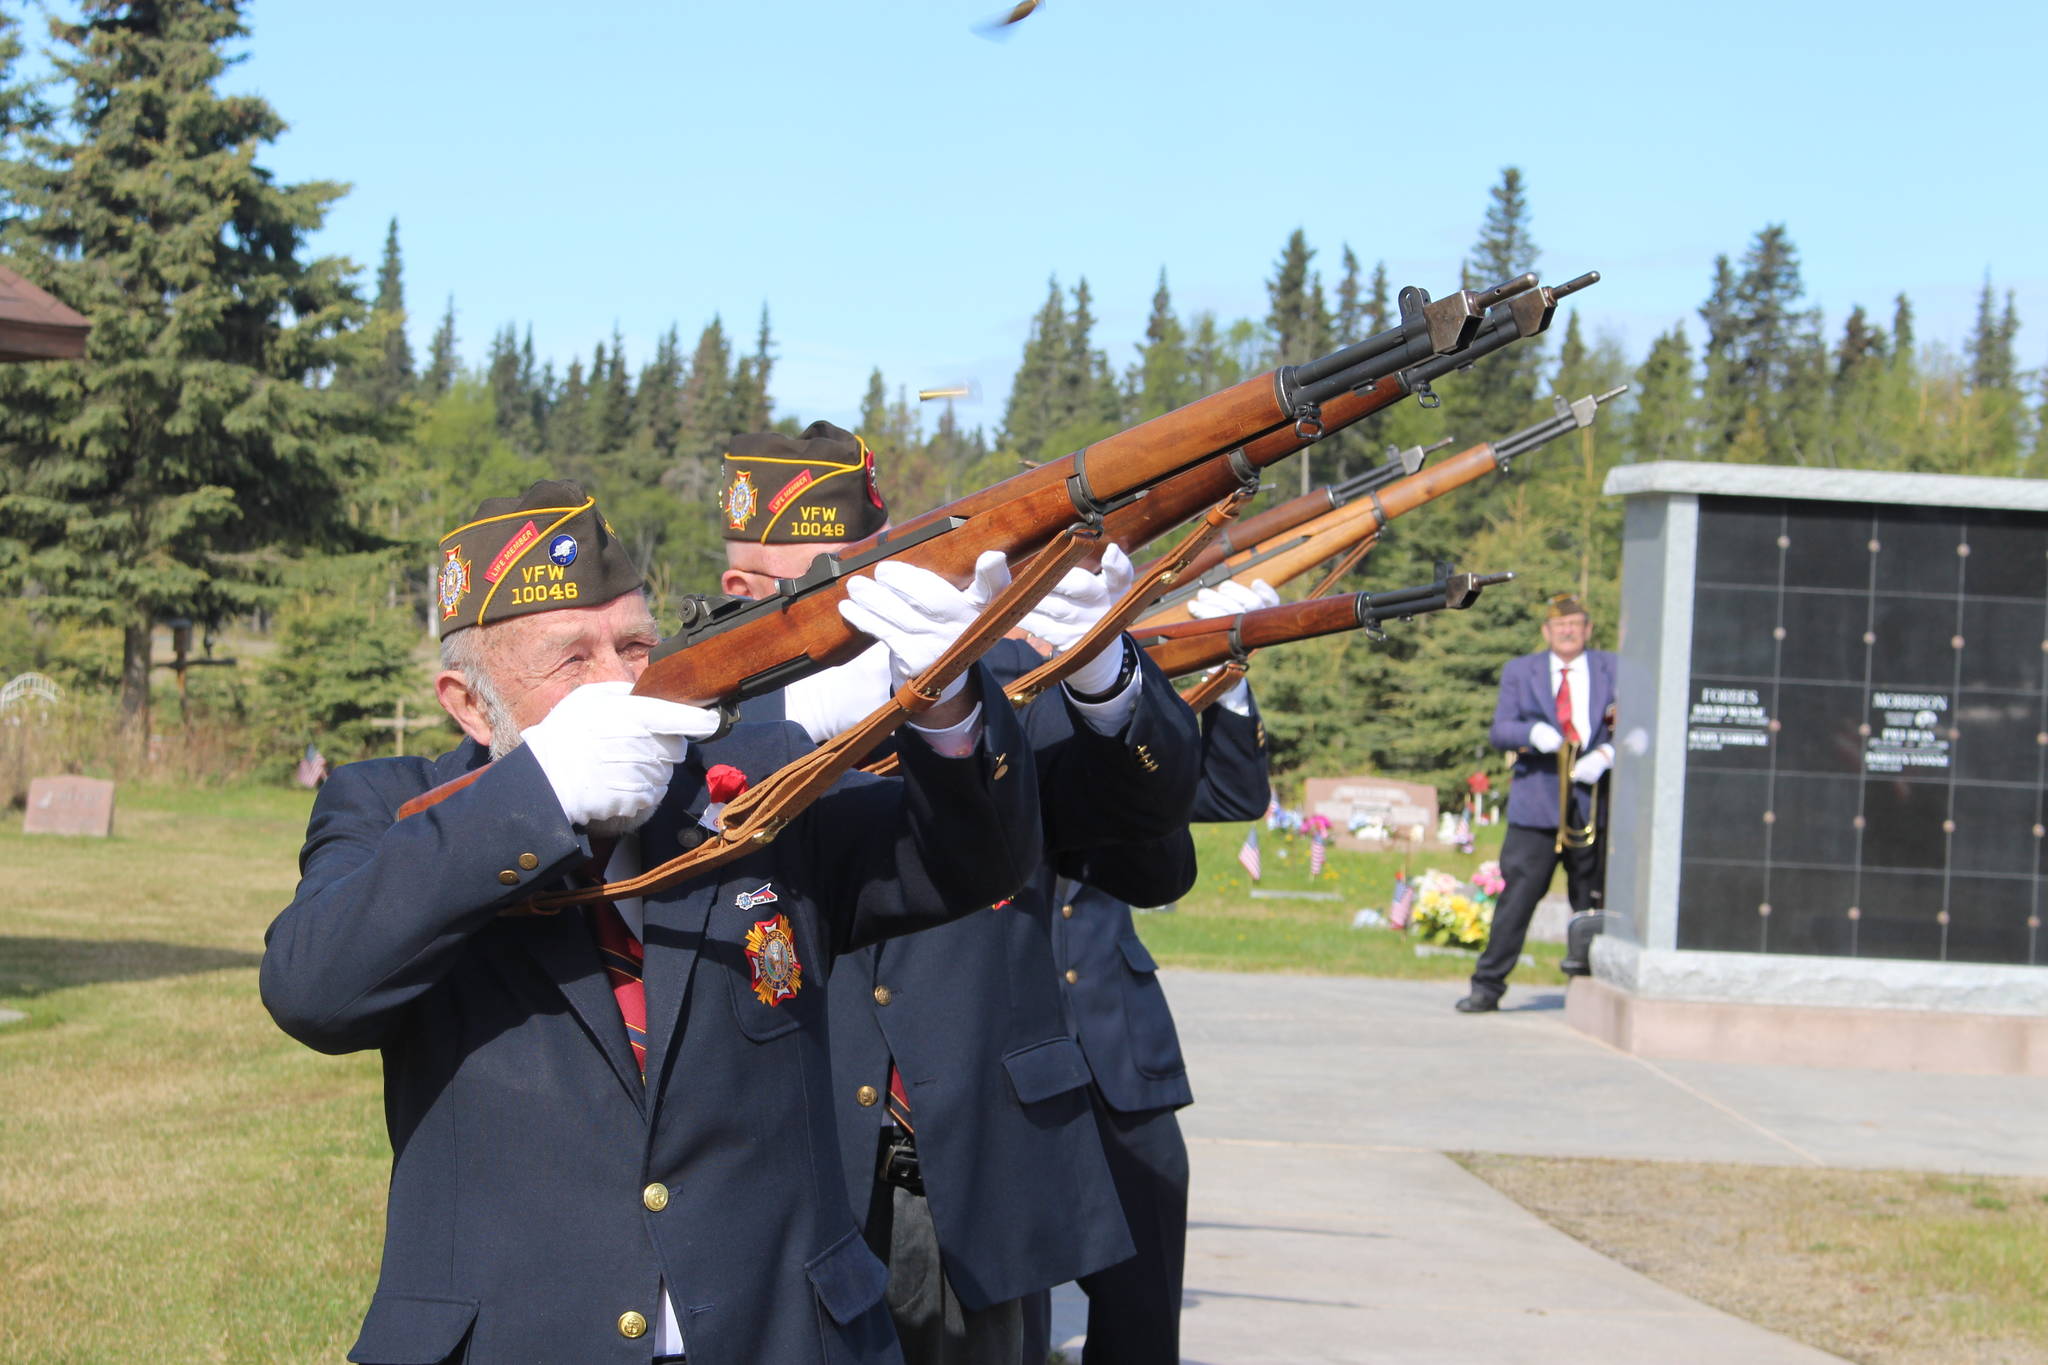 Kenai VFW Commander Mitch Johnson and members of the local VFW Honor Guard give a 21-gun salute during the Memorial Day ceremony at the Kenai Cemetery on May 25, 2020. (Photo by Brian Mazurek/Peninsula Clarion)